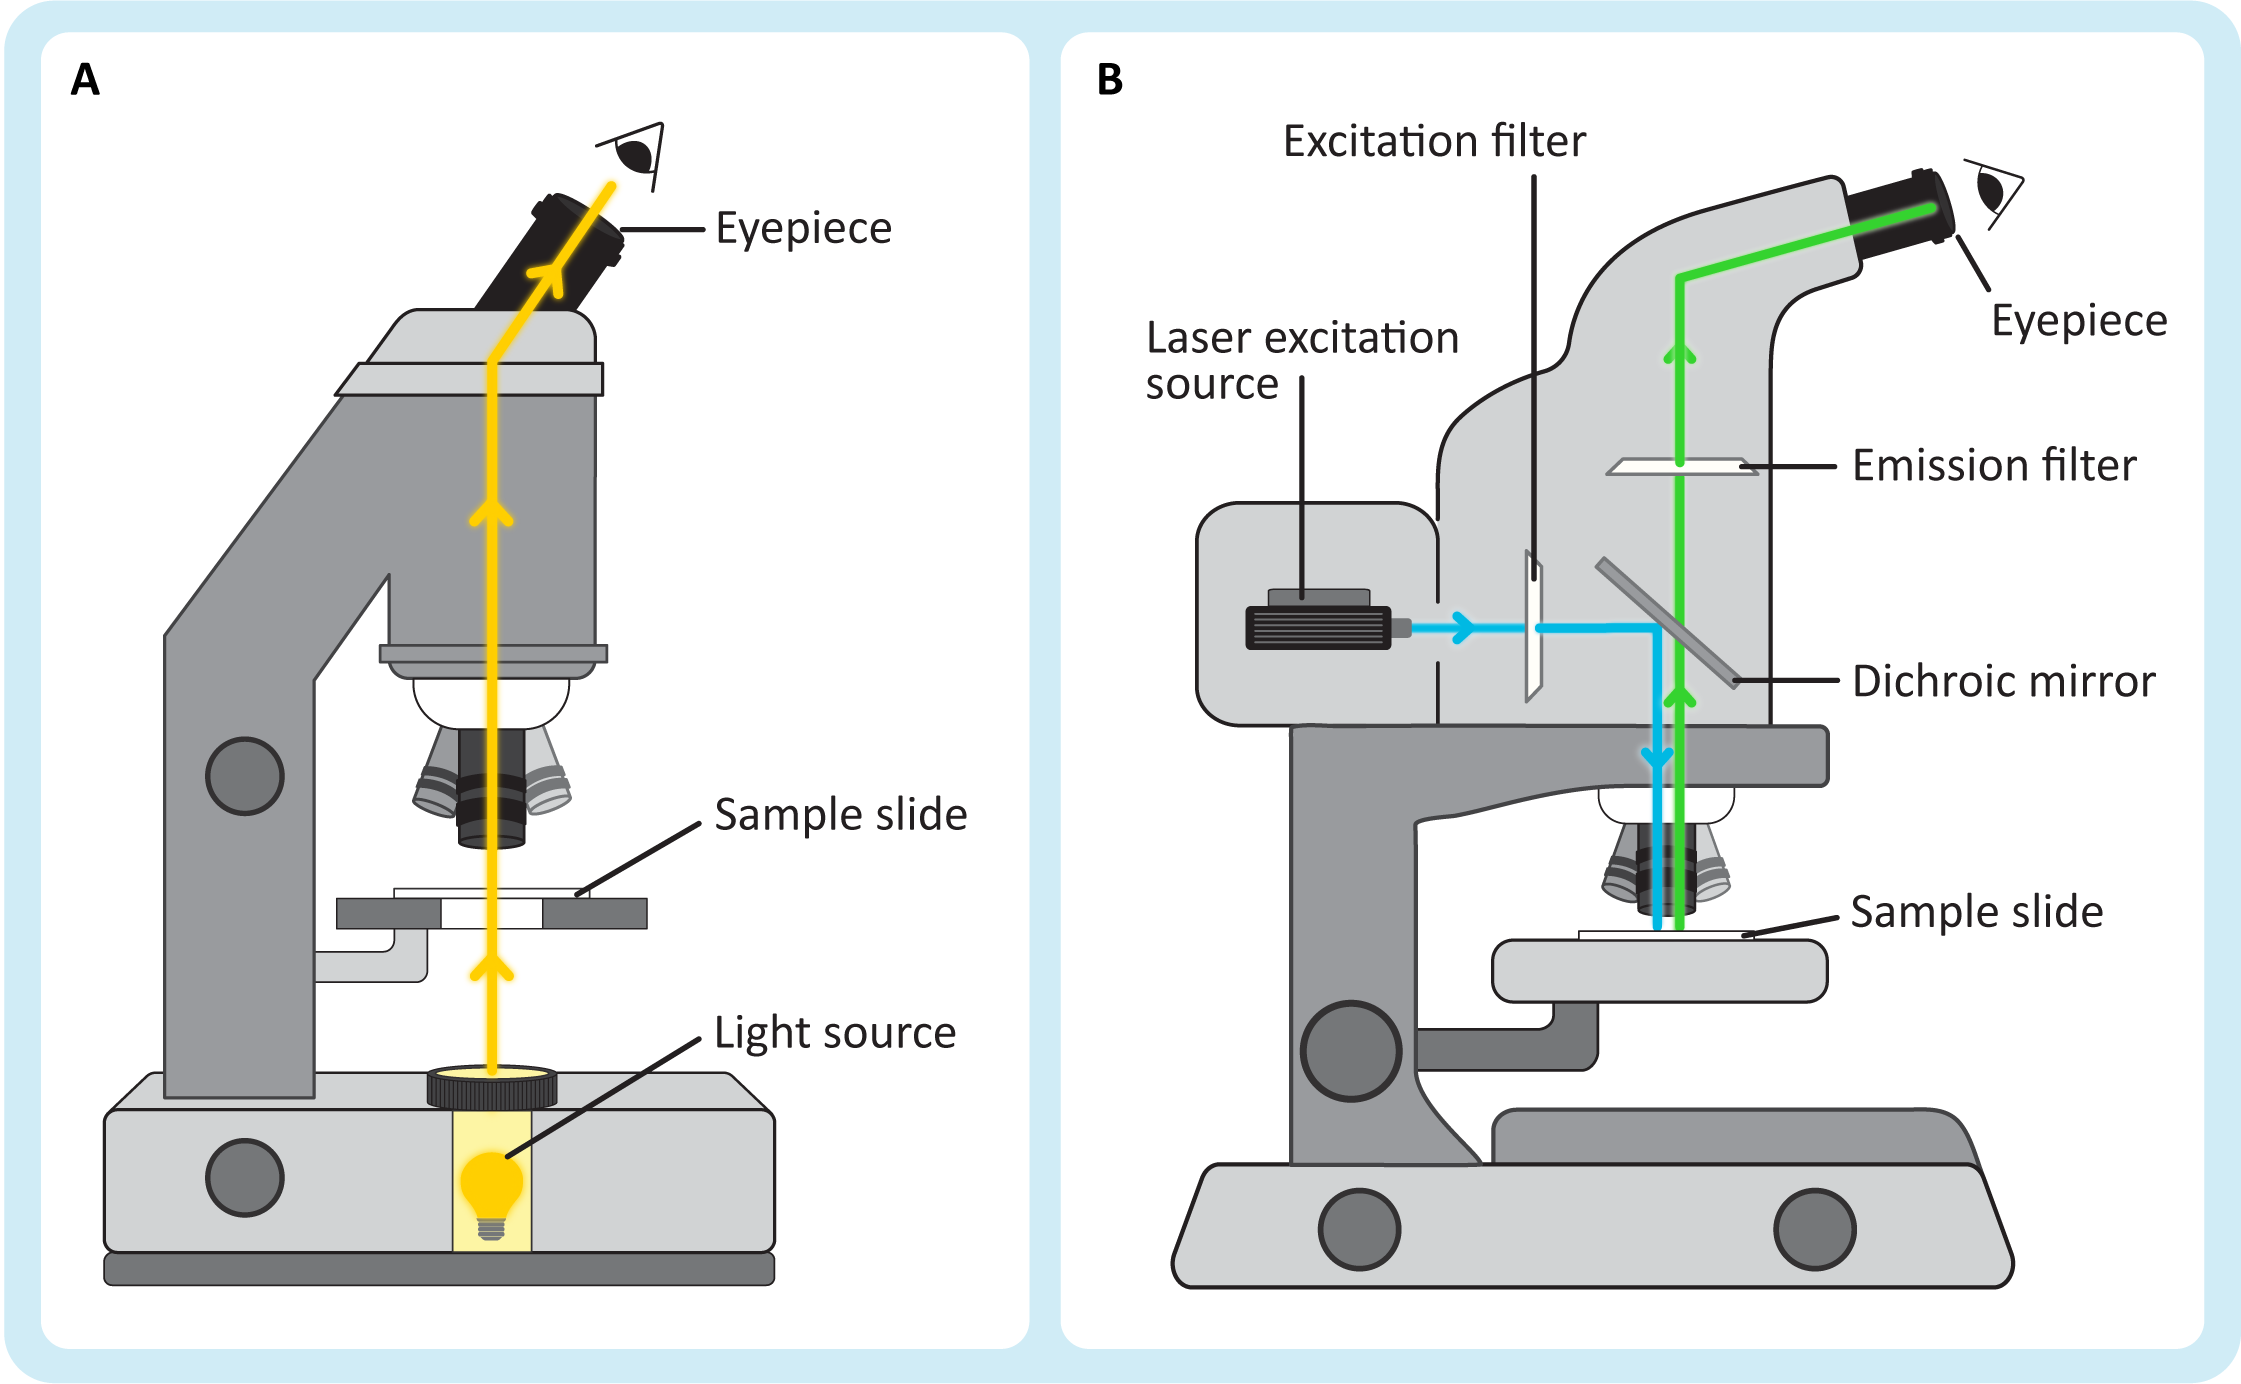 Schematics of transmitted light microscope and fluorescence microscopes showing the path of light through the specimens.